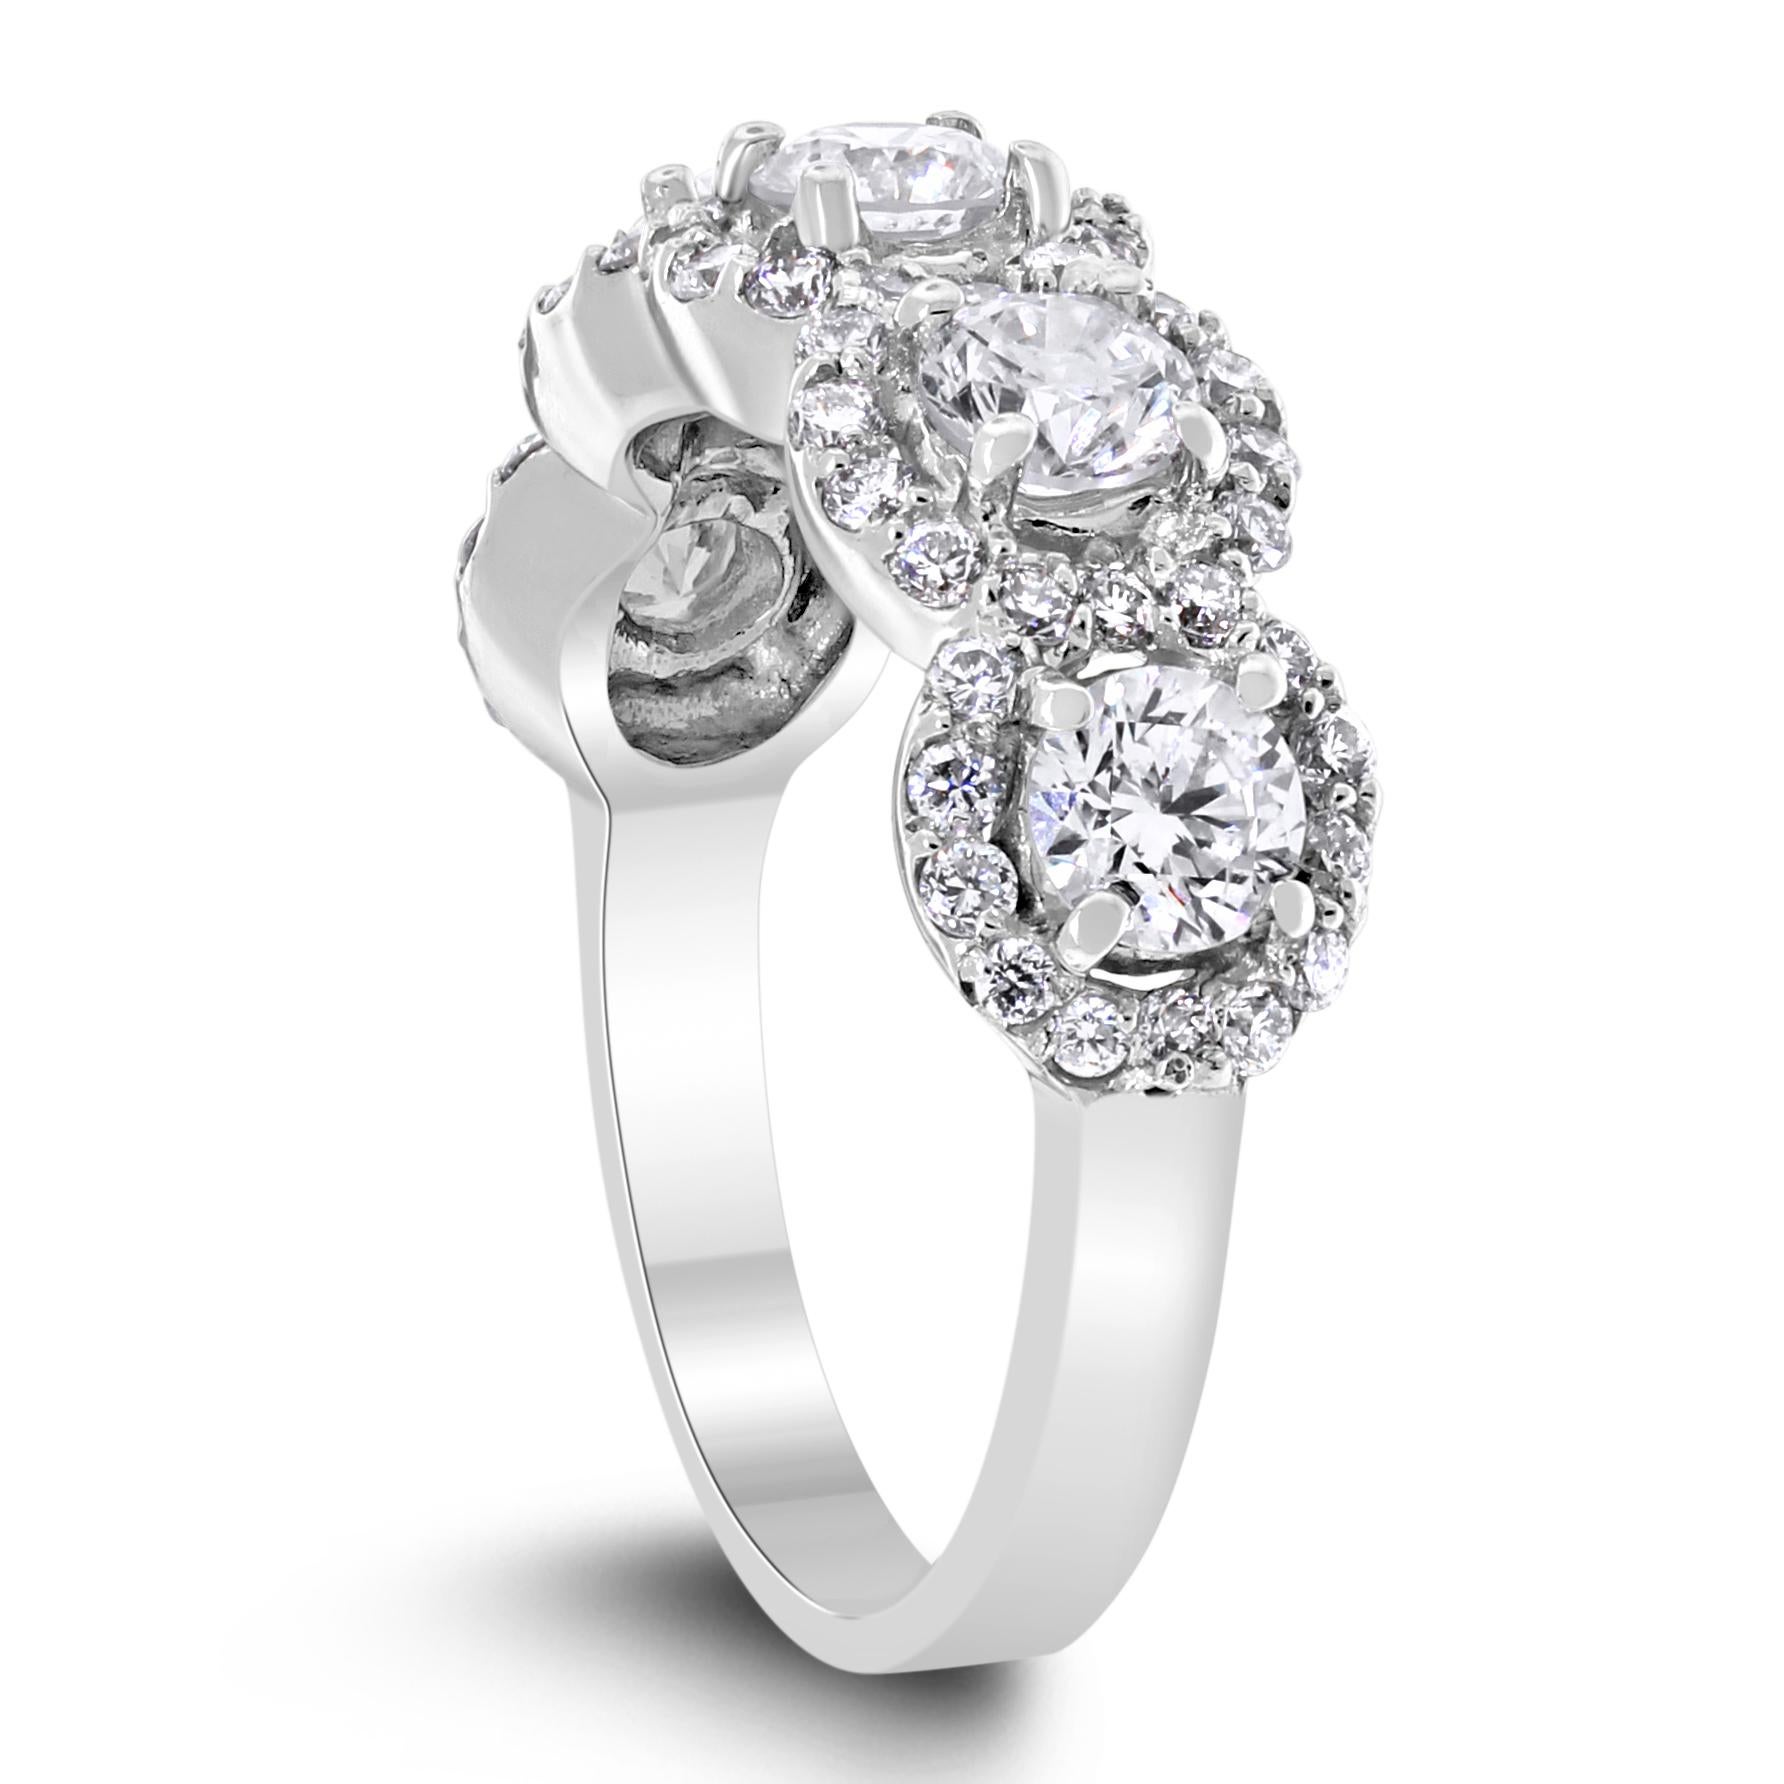 The Center of My World Band in a contemporary take on the classic 5 Diamond Band that enhances the brilliance of each of the 5 center diamonds with a halo.

Total Diamond Weight: 1.77 ct 
No. of Diamonds: 63
Average Diamond Weight: 0.03 ct 
Diamond